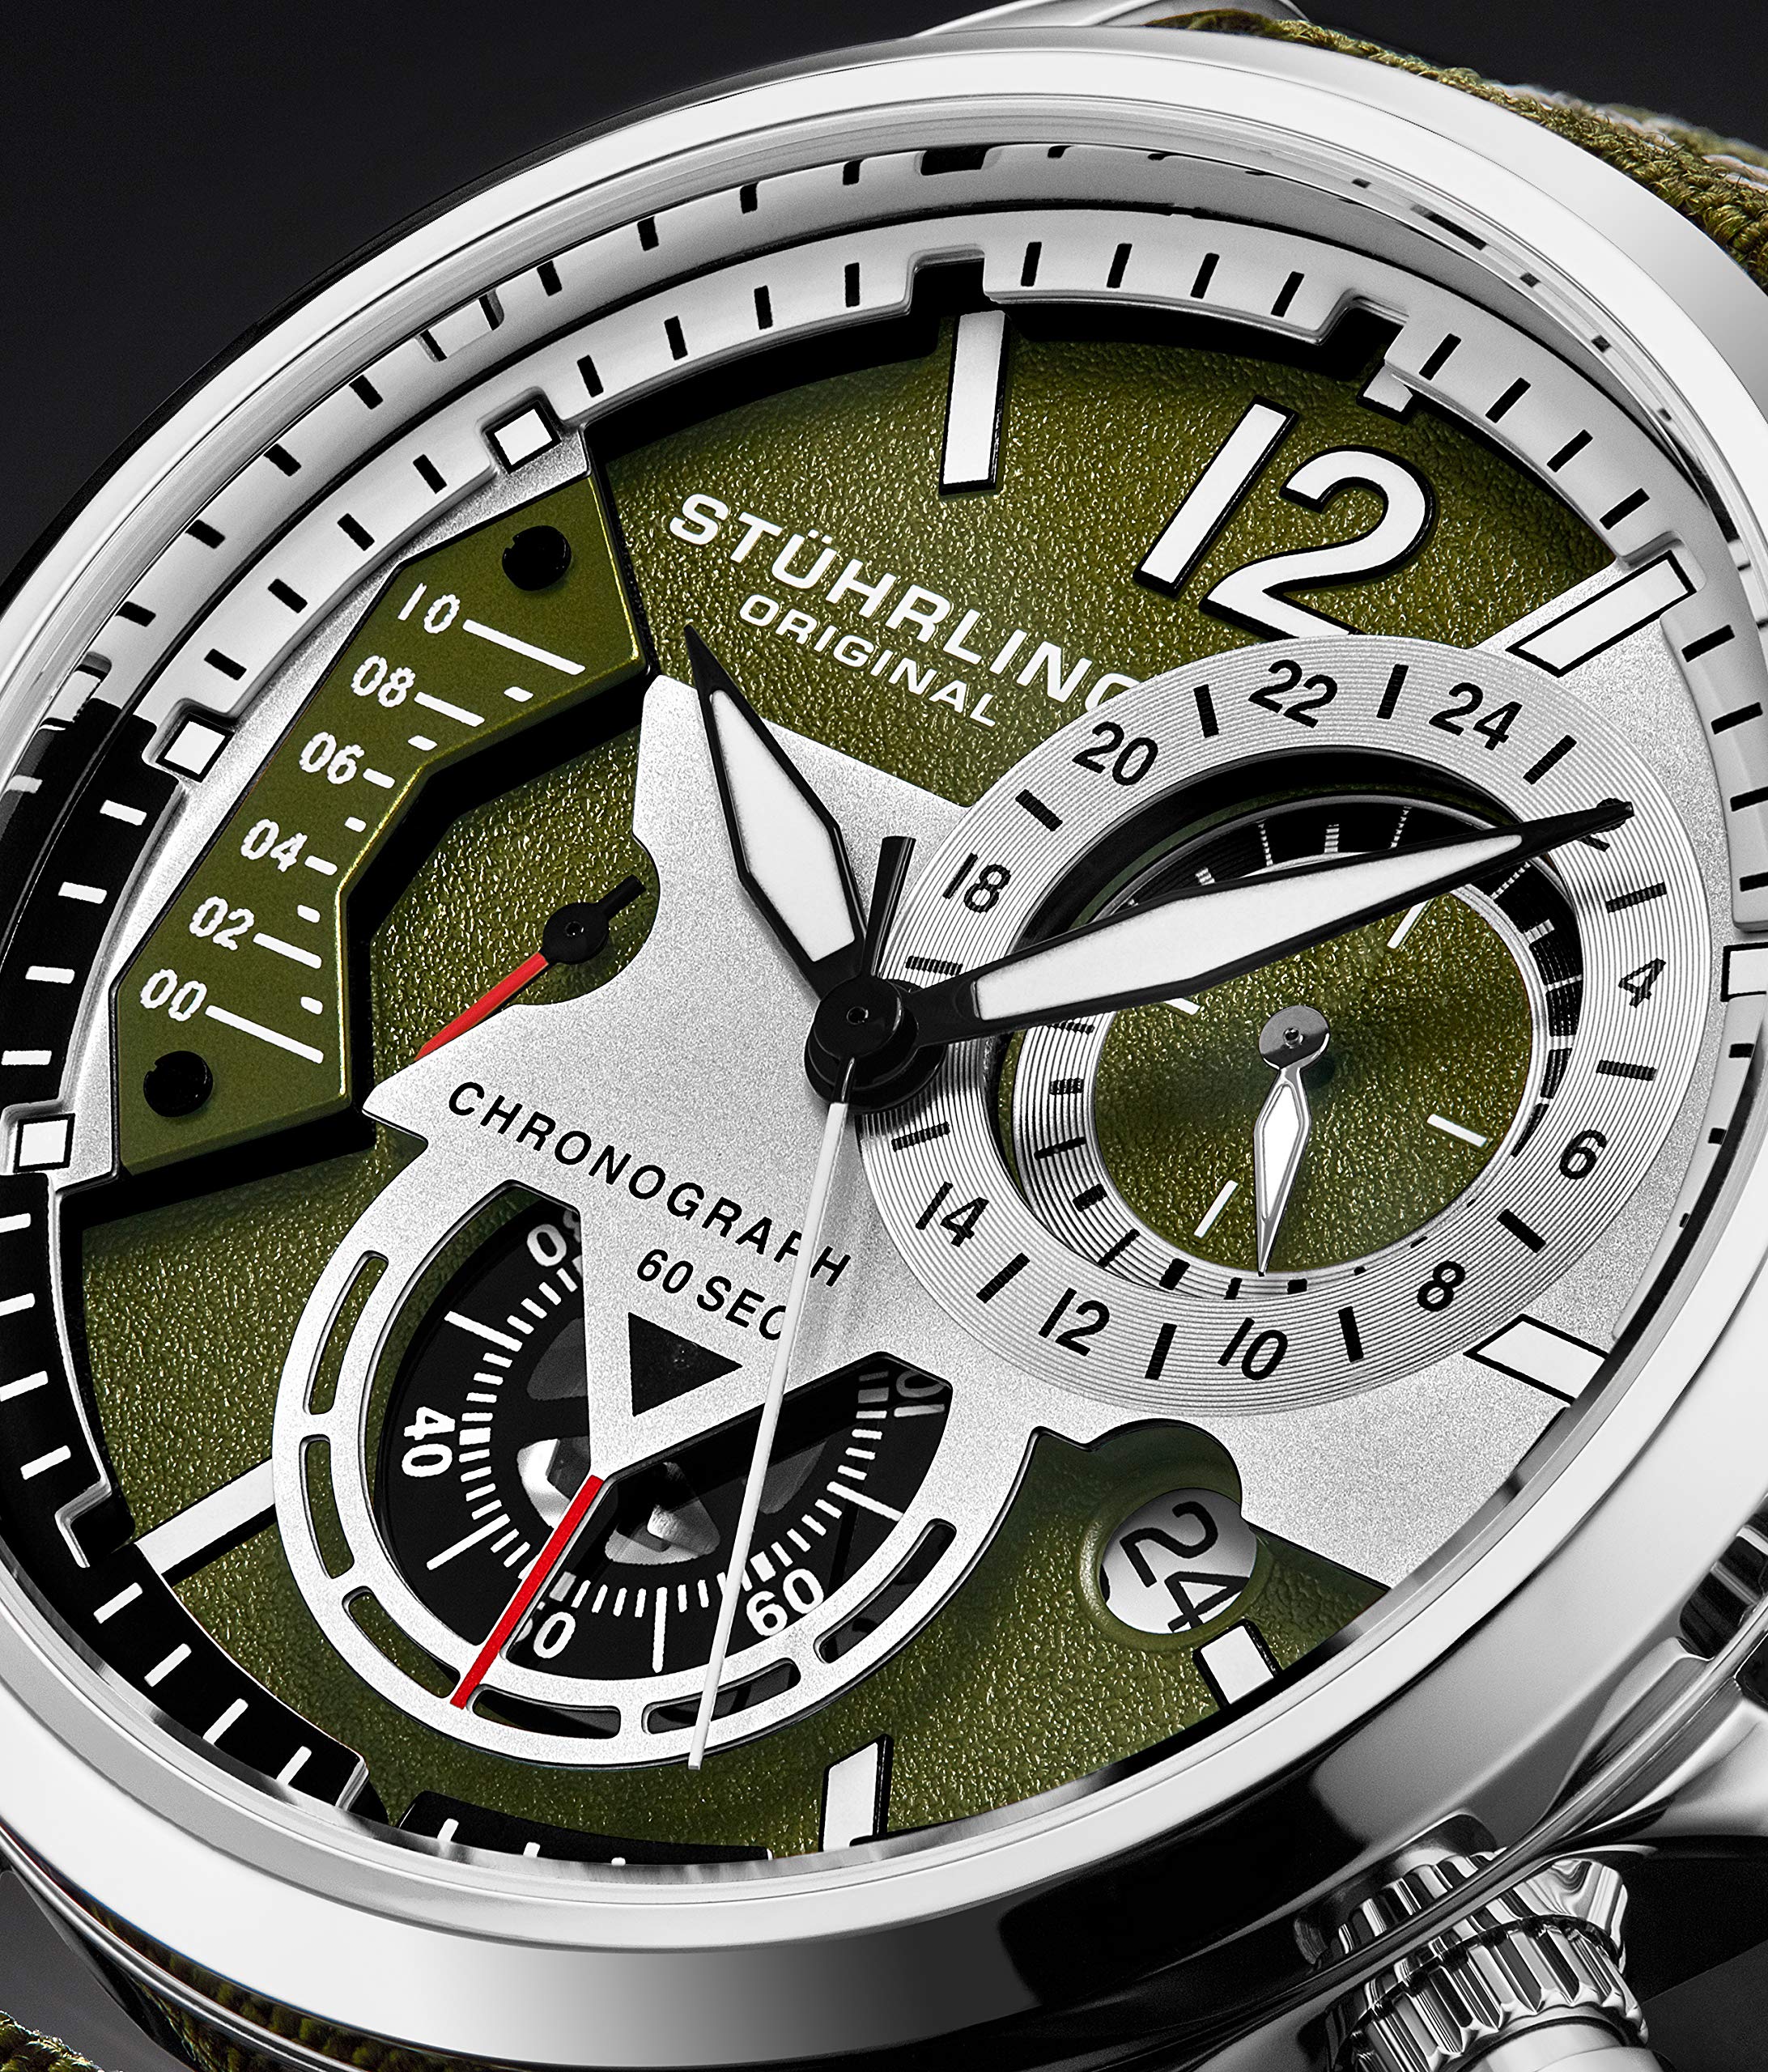 Stuhrling Original Mens Dress Watch - Aviator Watch with Leather Band Watches for Men with Date 24 Hour Subdial Chronograph Sports Watch